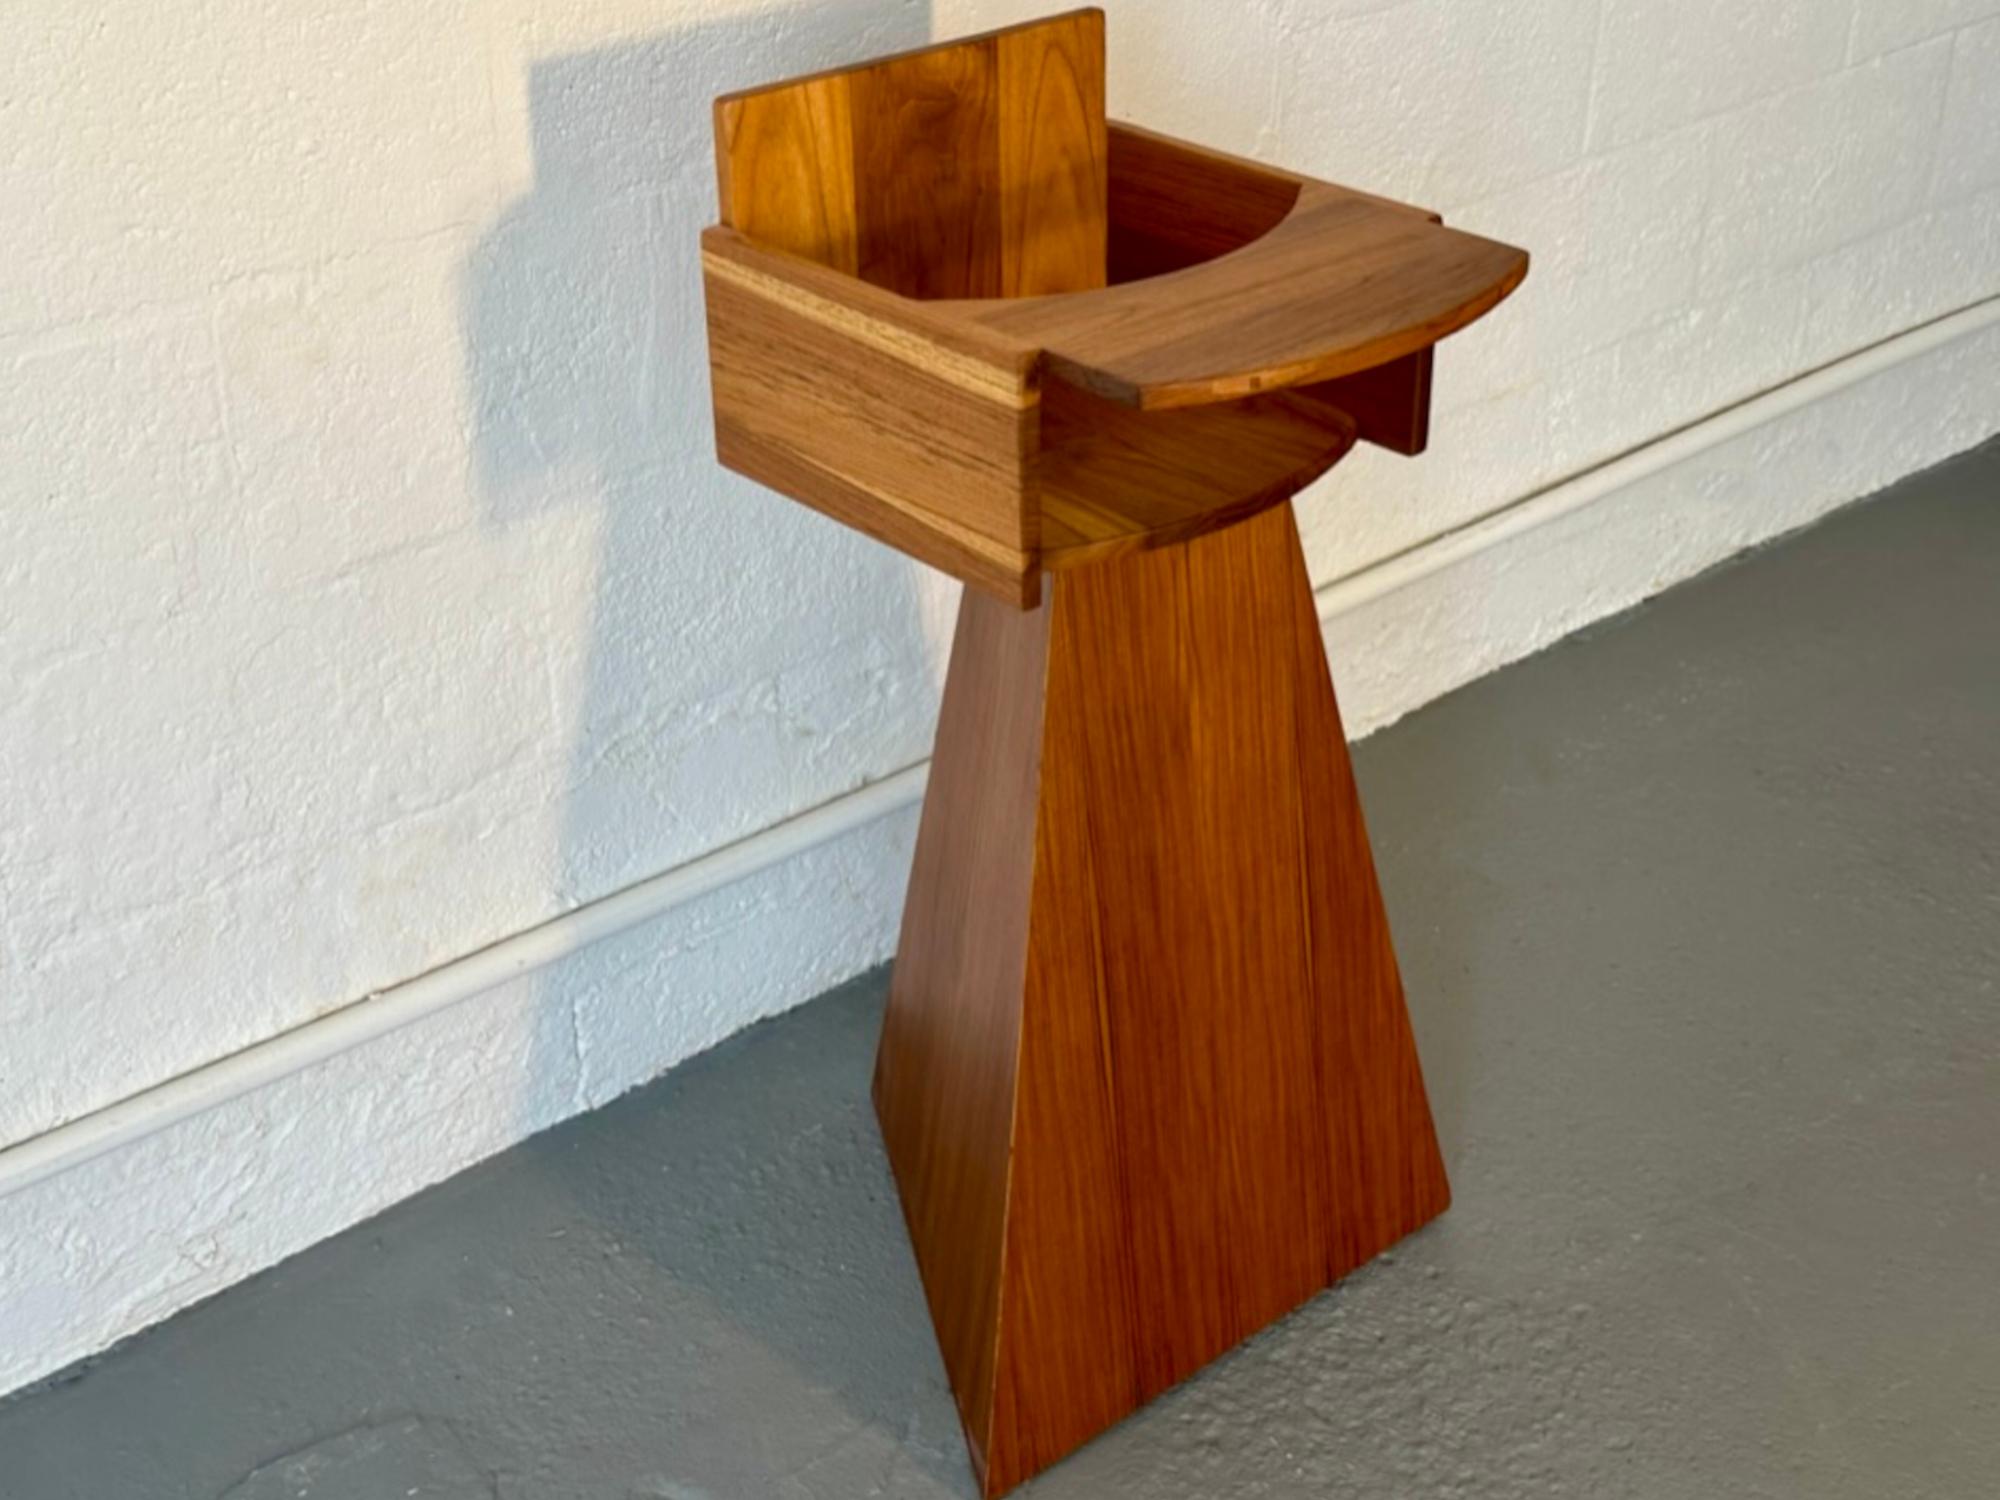 Hand-Crafted Baby Teak High Chair, Designed and Handcrafted by Rafael Calvo For Sale